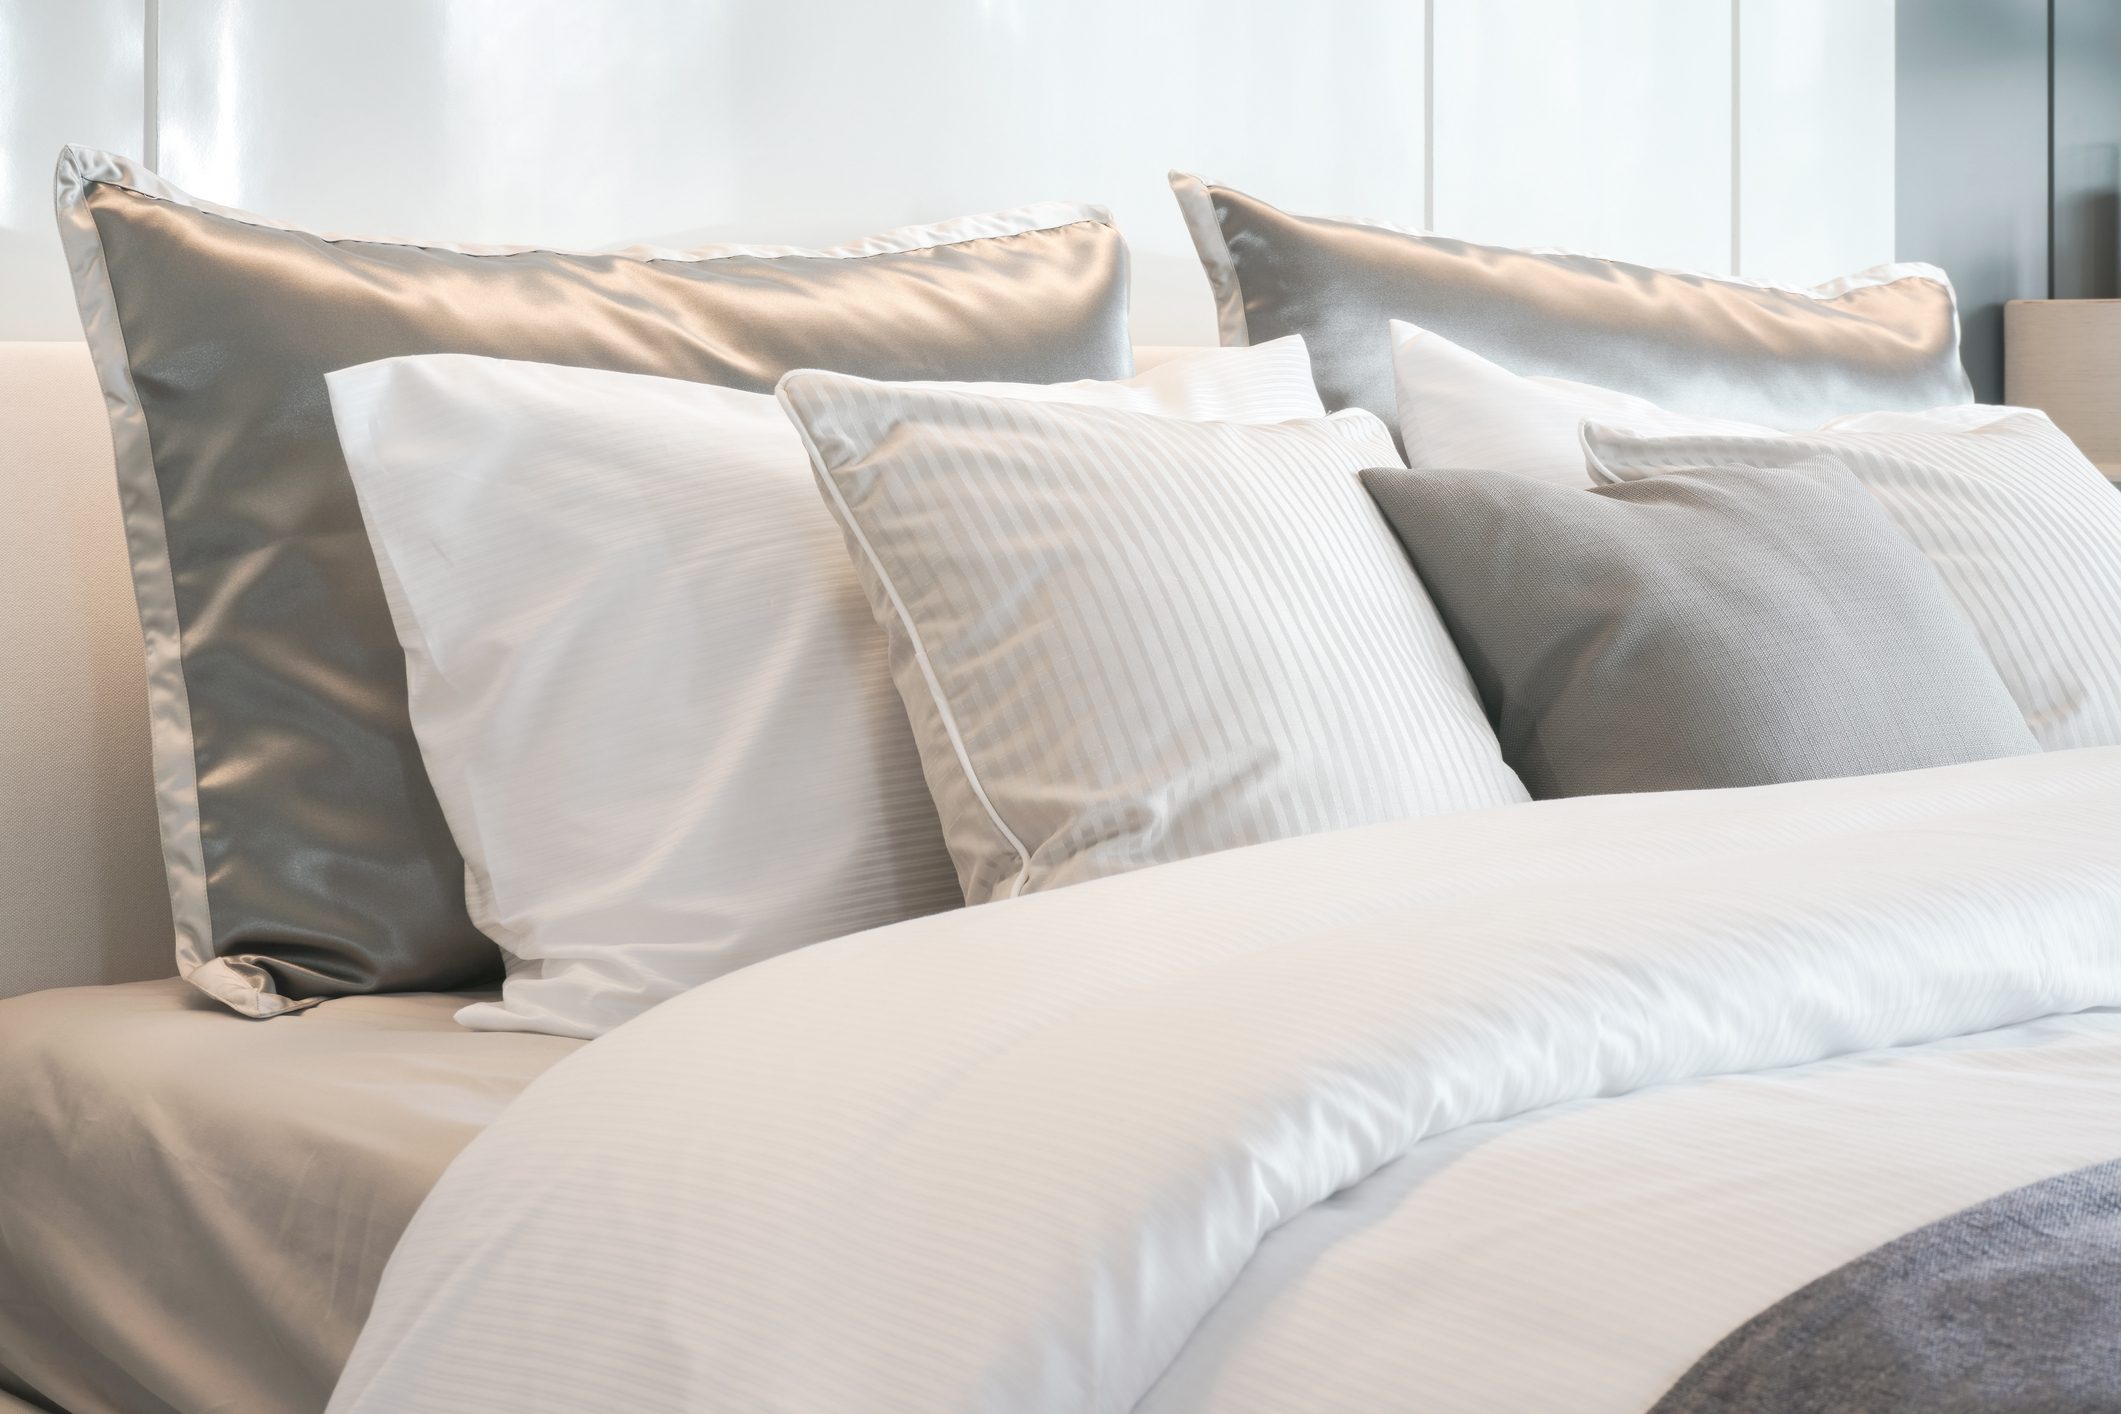 I Slept on a Satin Pillowcase for a Year—Here's My Review | The Healthy